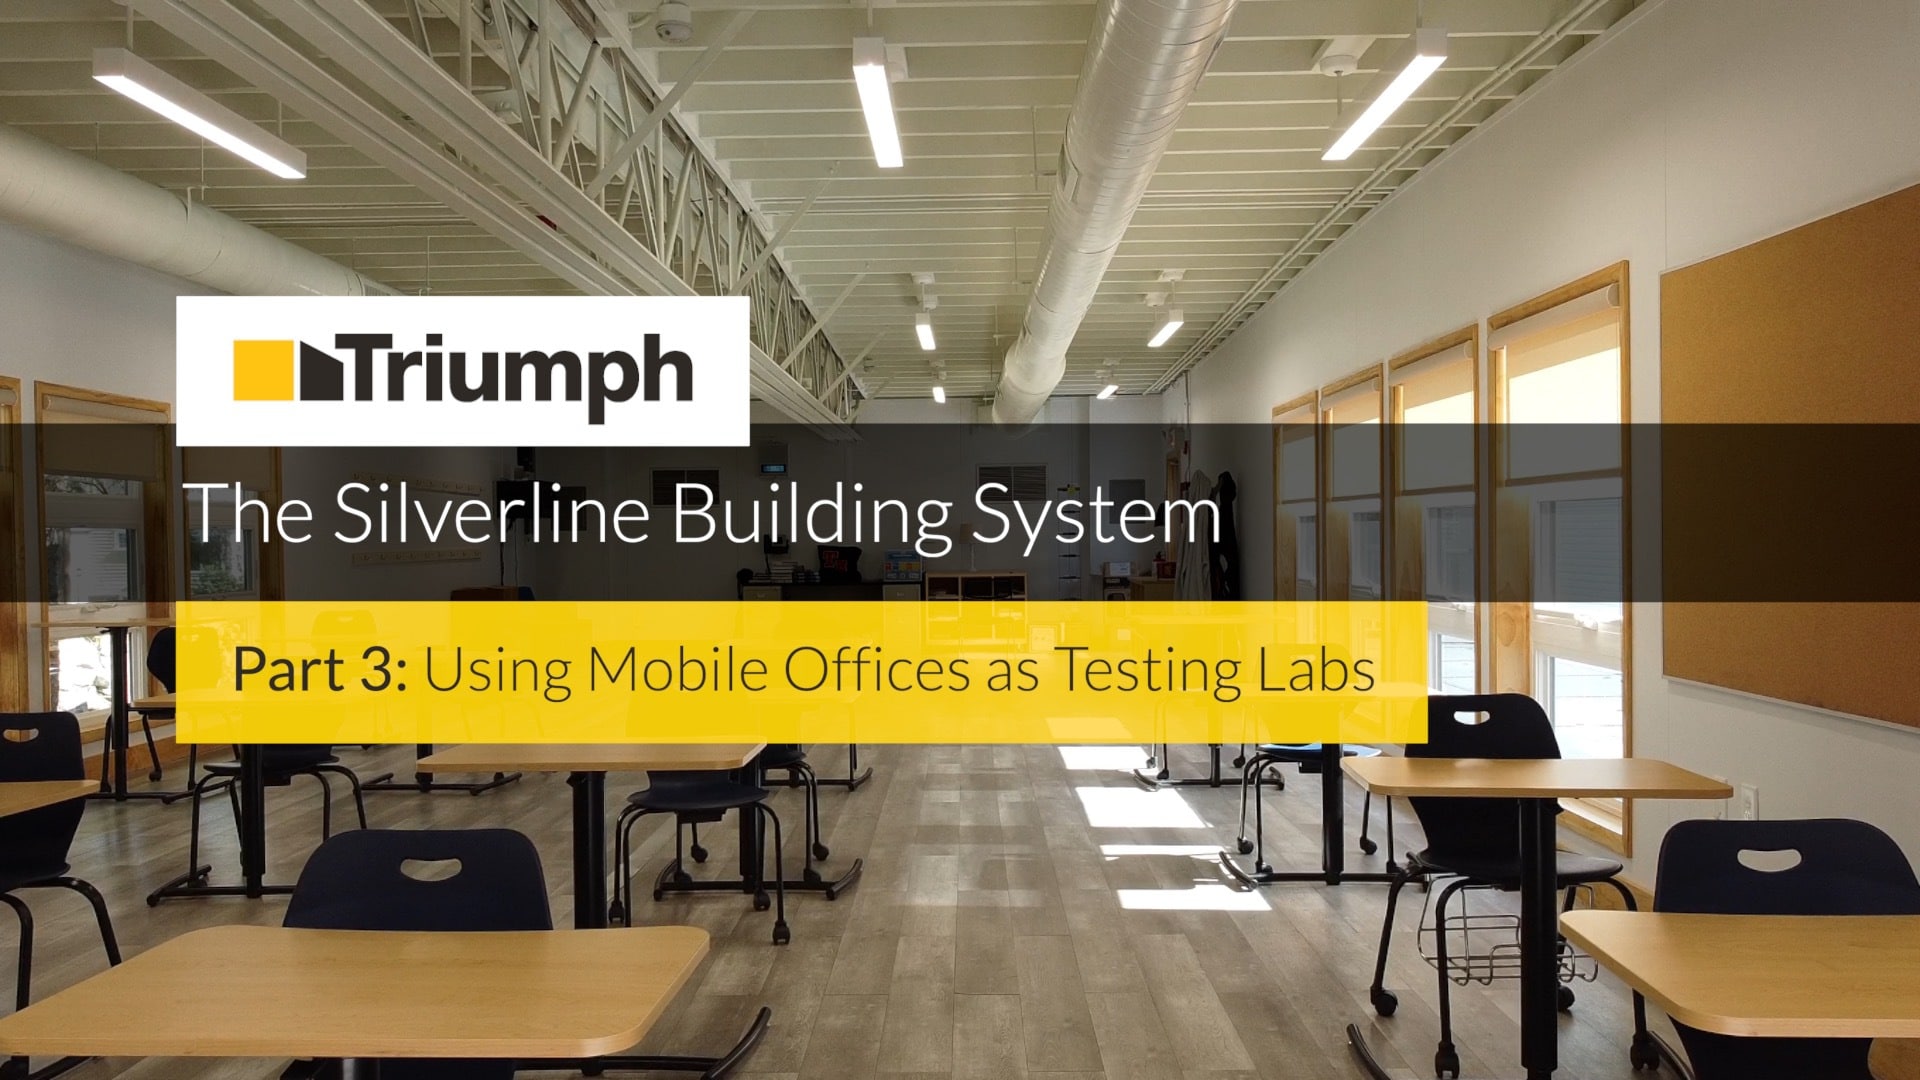 featured image for silverline building system